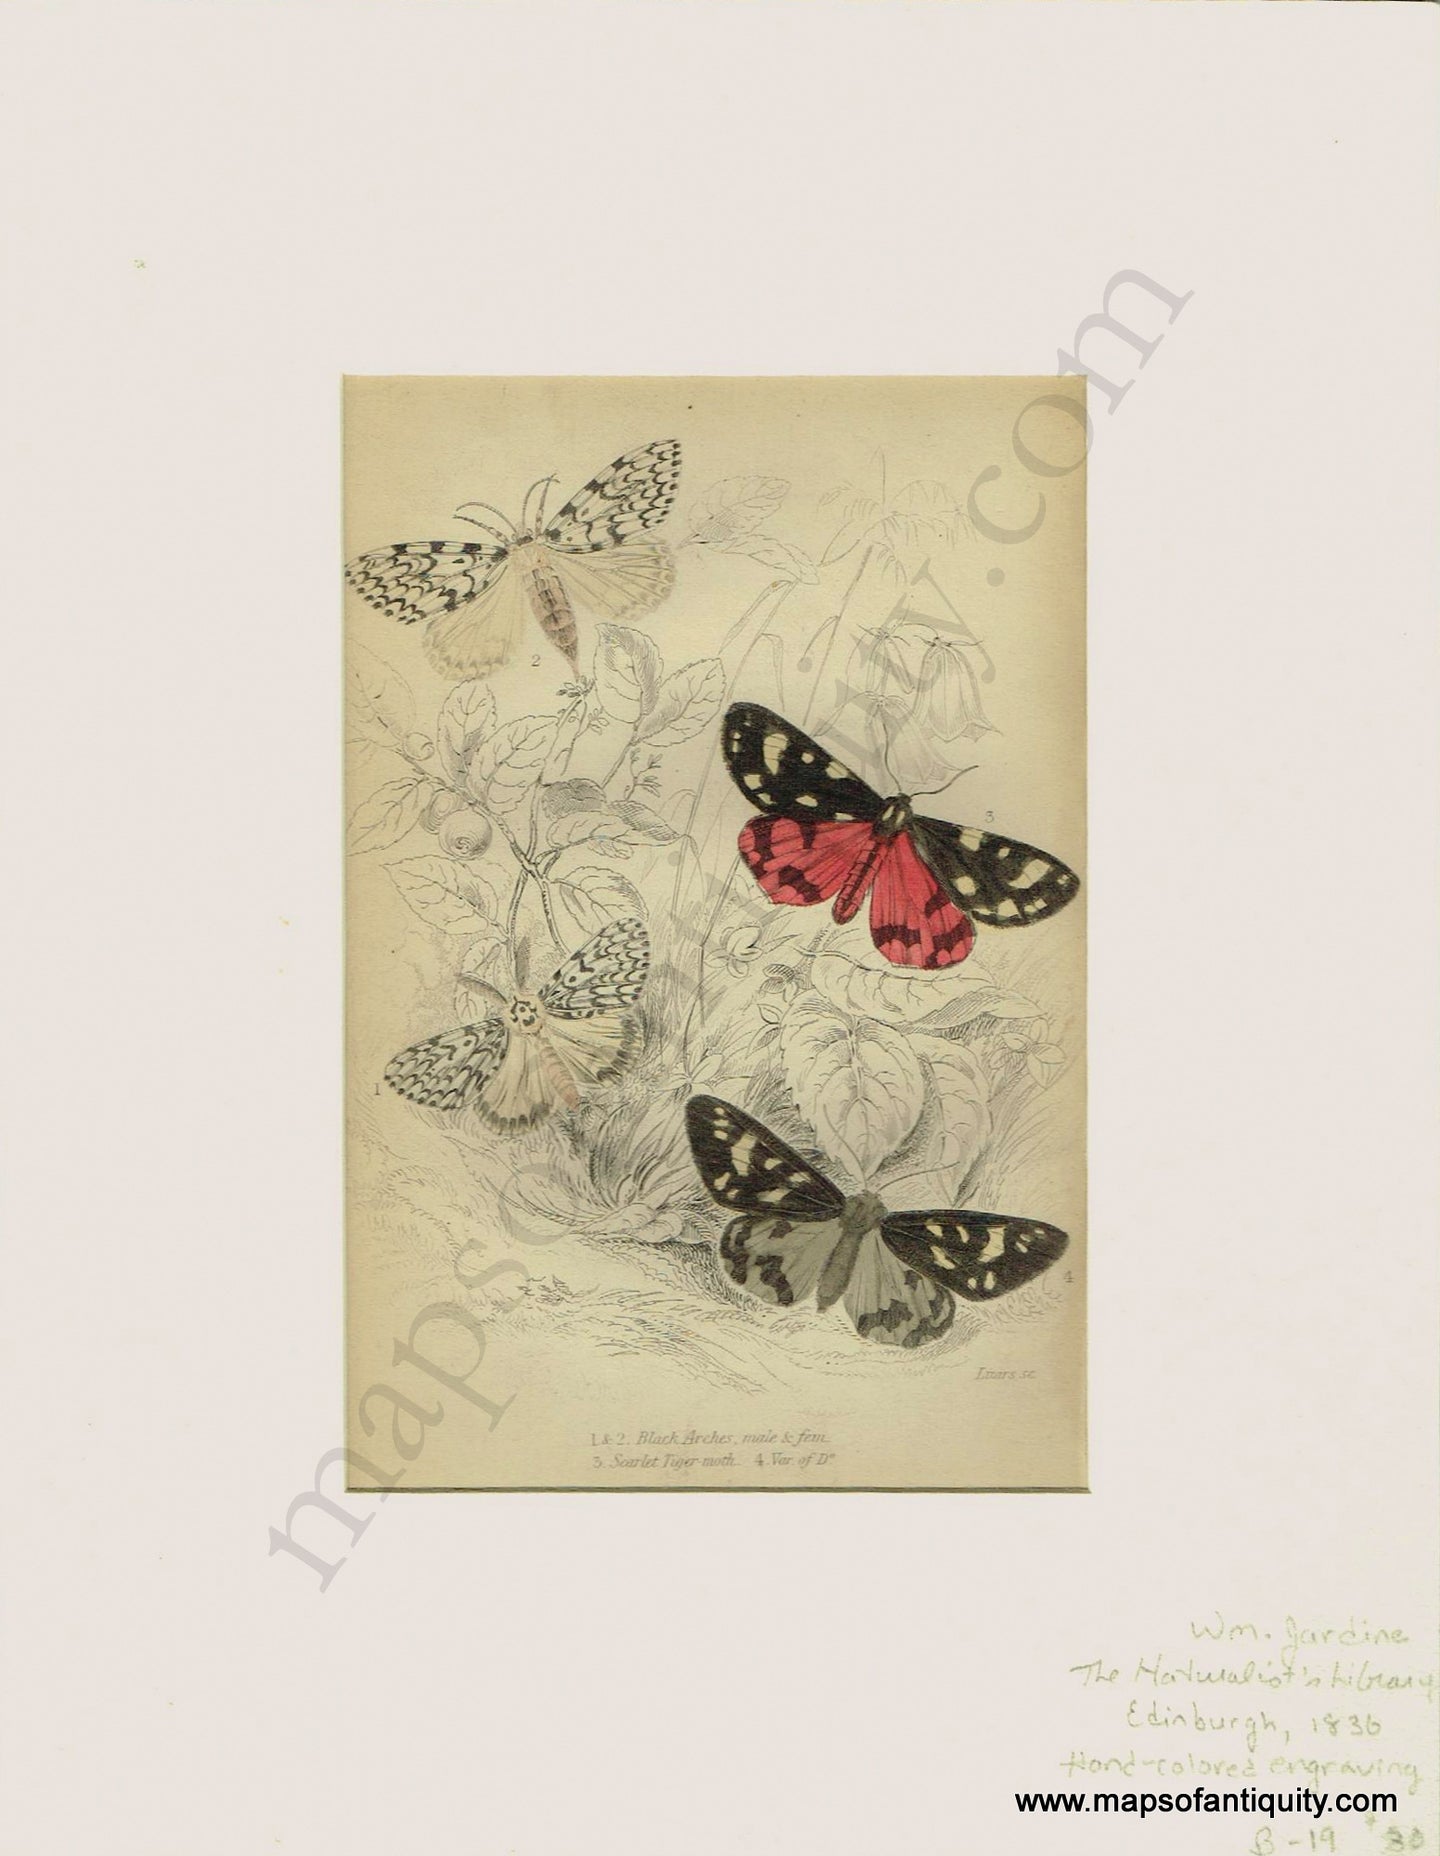 Antique-Print-Prints-Illustration-Illustrations-Engraved-Engraving-Engravings-Black-Arches-Scarlet-Tiger-Moth-Var.-of-Do.-Moths-Butterfly-Butterflies-Insects-Bugs-Natural-History-Diagram-Diagrams-Naturalist's-Library-Jardine-1836-1830s-1800s-Early-Mid-19th-Century-Maps-of-Antiquity